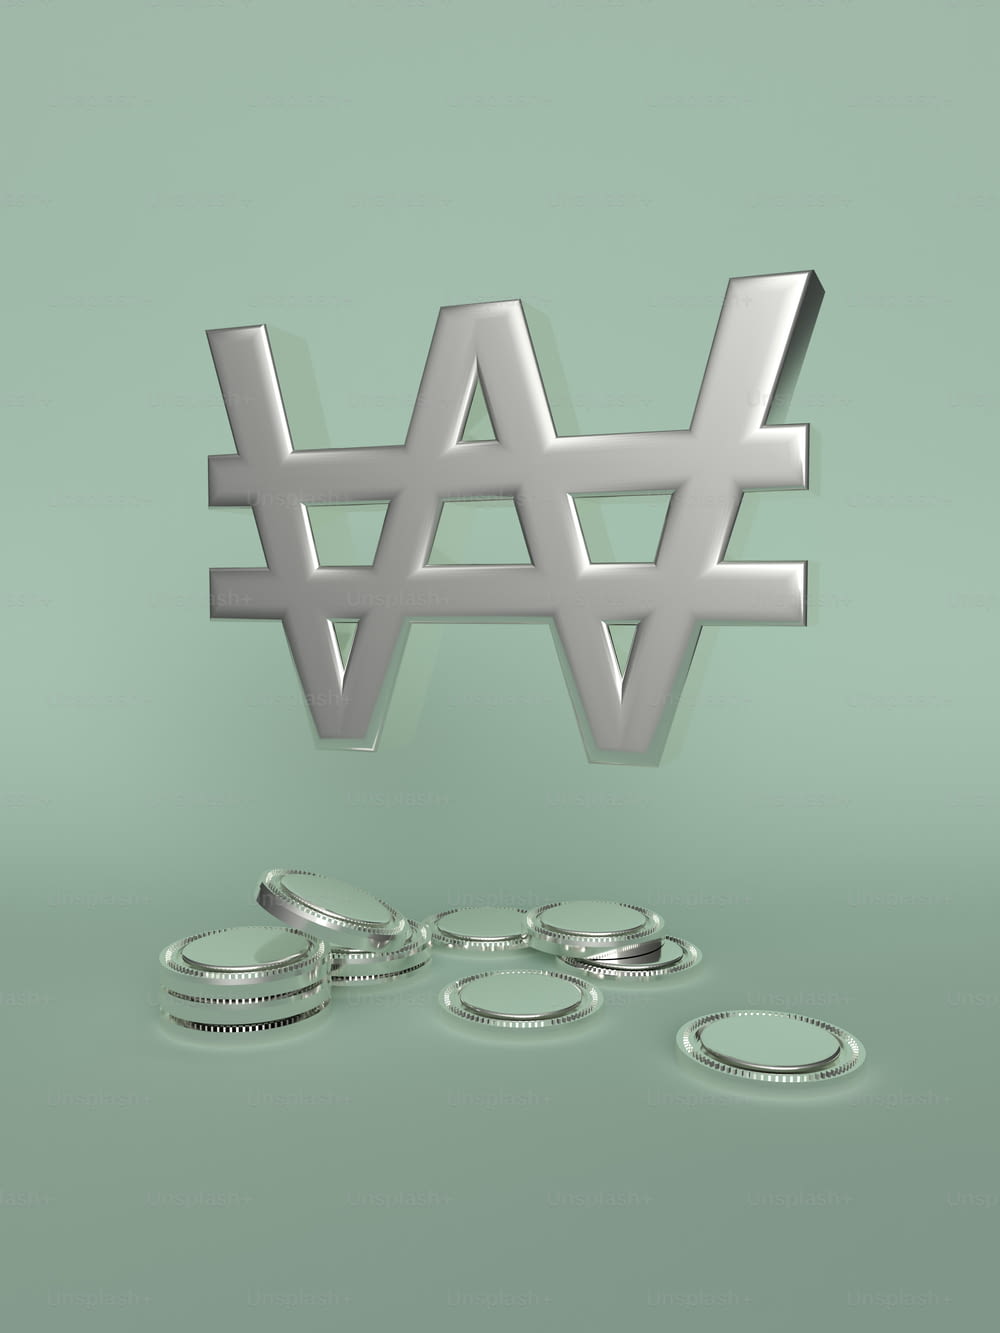 a 3d rendering of the word w and some coins